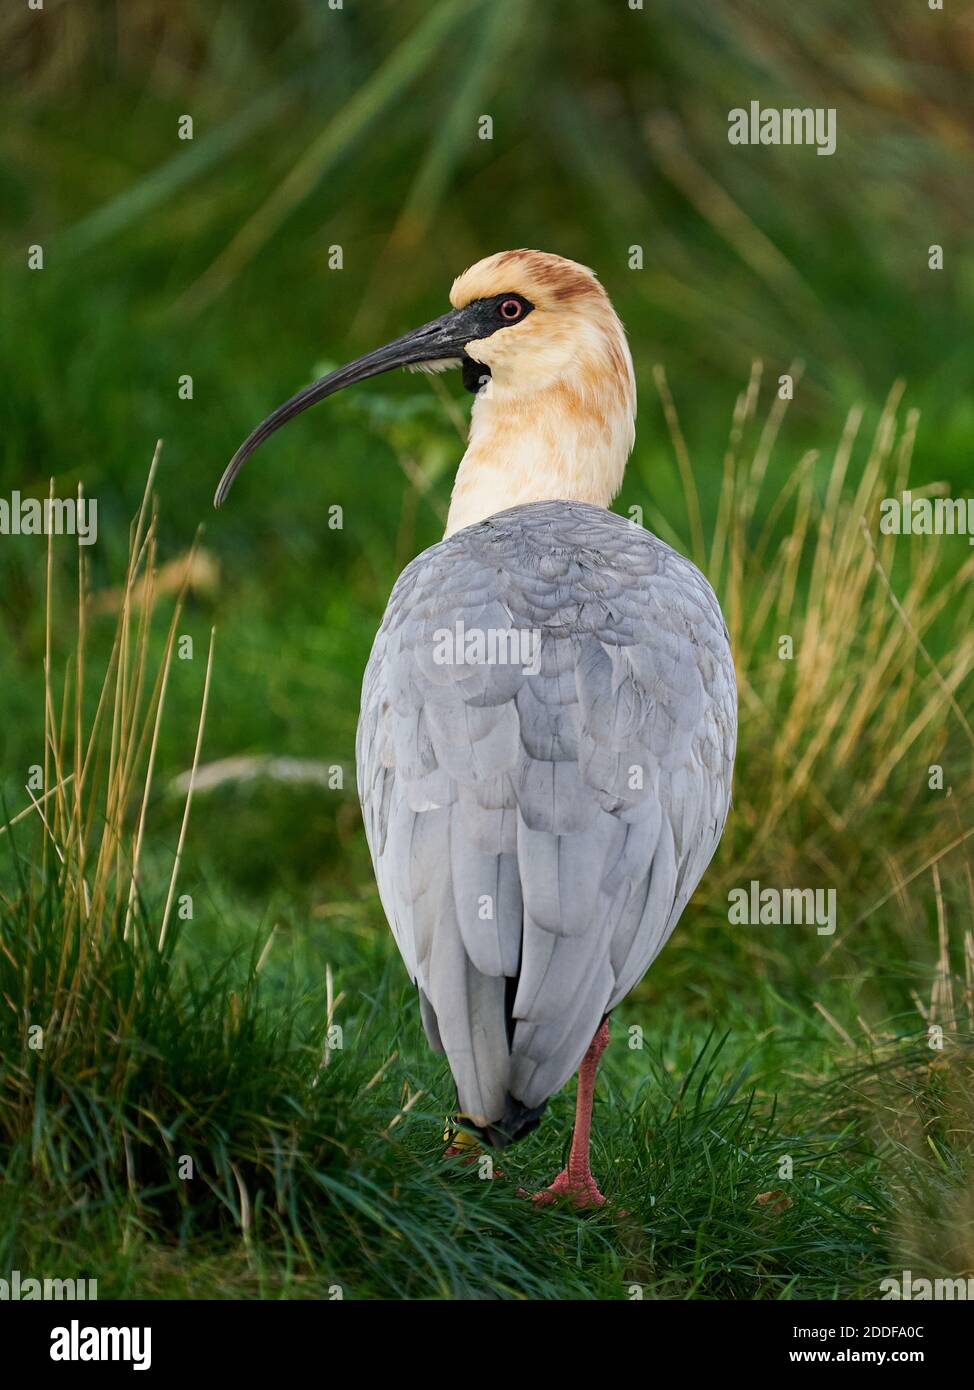 Black-faced ibis in its natural enviroment Stock Photo